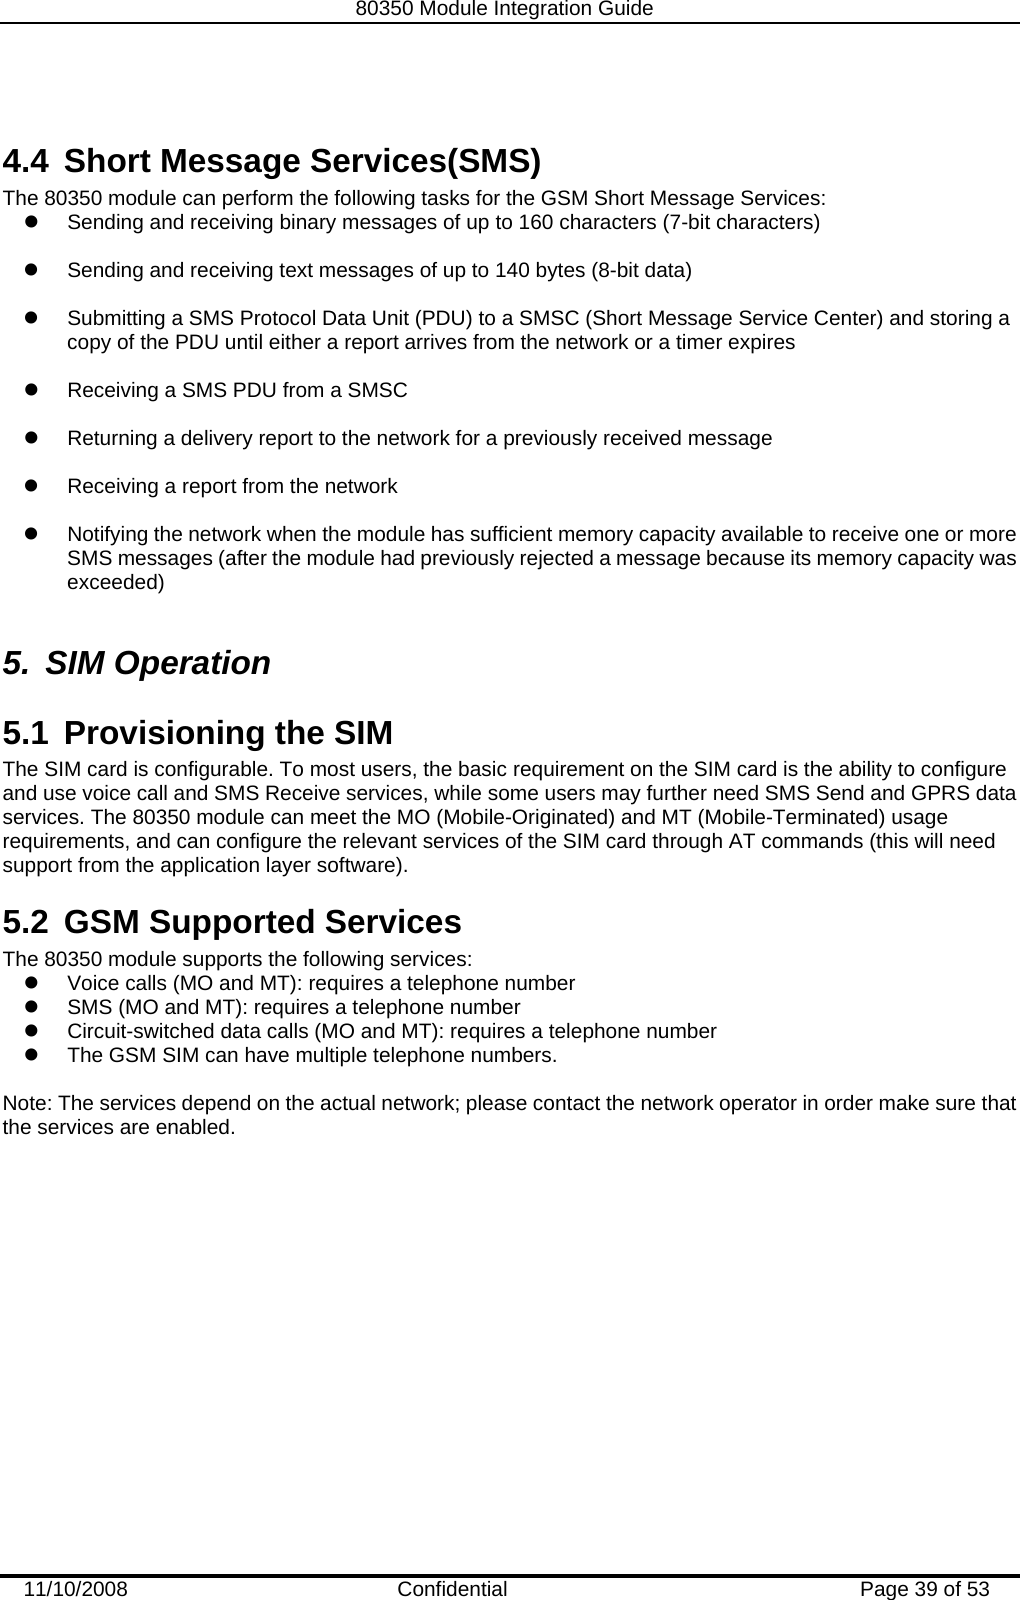   80350 Module Integration Guide  11/10/2008    Confidential  Page 39 of 53  4.4  Short Message Services(SMS) The 80350 module can perform the following tasks for the GSM Short Message Services: z  Sending and receiving binary messages of up to 160 characters (7-bit characters)  z  Sending and receiving text messages of up to 140 bytes (8-bit data)  z  Submitting a SMS Protocol Data Unit (PDU) to a SMSC (Short Message Service Center) and storing a copy of the PDU until either a report arrives from the network or a timer expires  z  Receiving a SMS PDU from a SMSC  z  Returning a delivery report to the network for a previously received message  z  Receiving a report from the network  z  Notifying the network when the module has sufficient memory capacity available to receive one or more SMS messages (after the module had previously rejected a message because its memory capacity was exceeded)  5. SIM Operation 5.1  Provisioning the SIM The SIM card is configurable. To most users, the basic requirement on the SIM card is the ability to configure and use voice call and SMS Receive services, while some users may further need SMS Send and GPRS data services. The 80350 module can meet the MO (Mobile-Originated) and MT (Mobile-Terminated) usage requirements, and can configure the relevant services of the SIM card through AT commands (this will need support from the application layer software). 5.2  GSM Supported Services The 80350 module supports the following services: z  Voice calls (MO and MT): requires a telephone number z  SMS (MO and MT): requires a telephone number  z  Circuit-switched data calls (MO and MT): requires a telephone number z  The GSM SIM can have multiple telephone numbers.  Note: The services depend on the actual network; please contact the network operator in order make sure that  the services are enabled.  